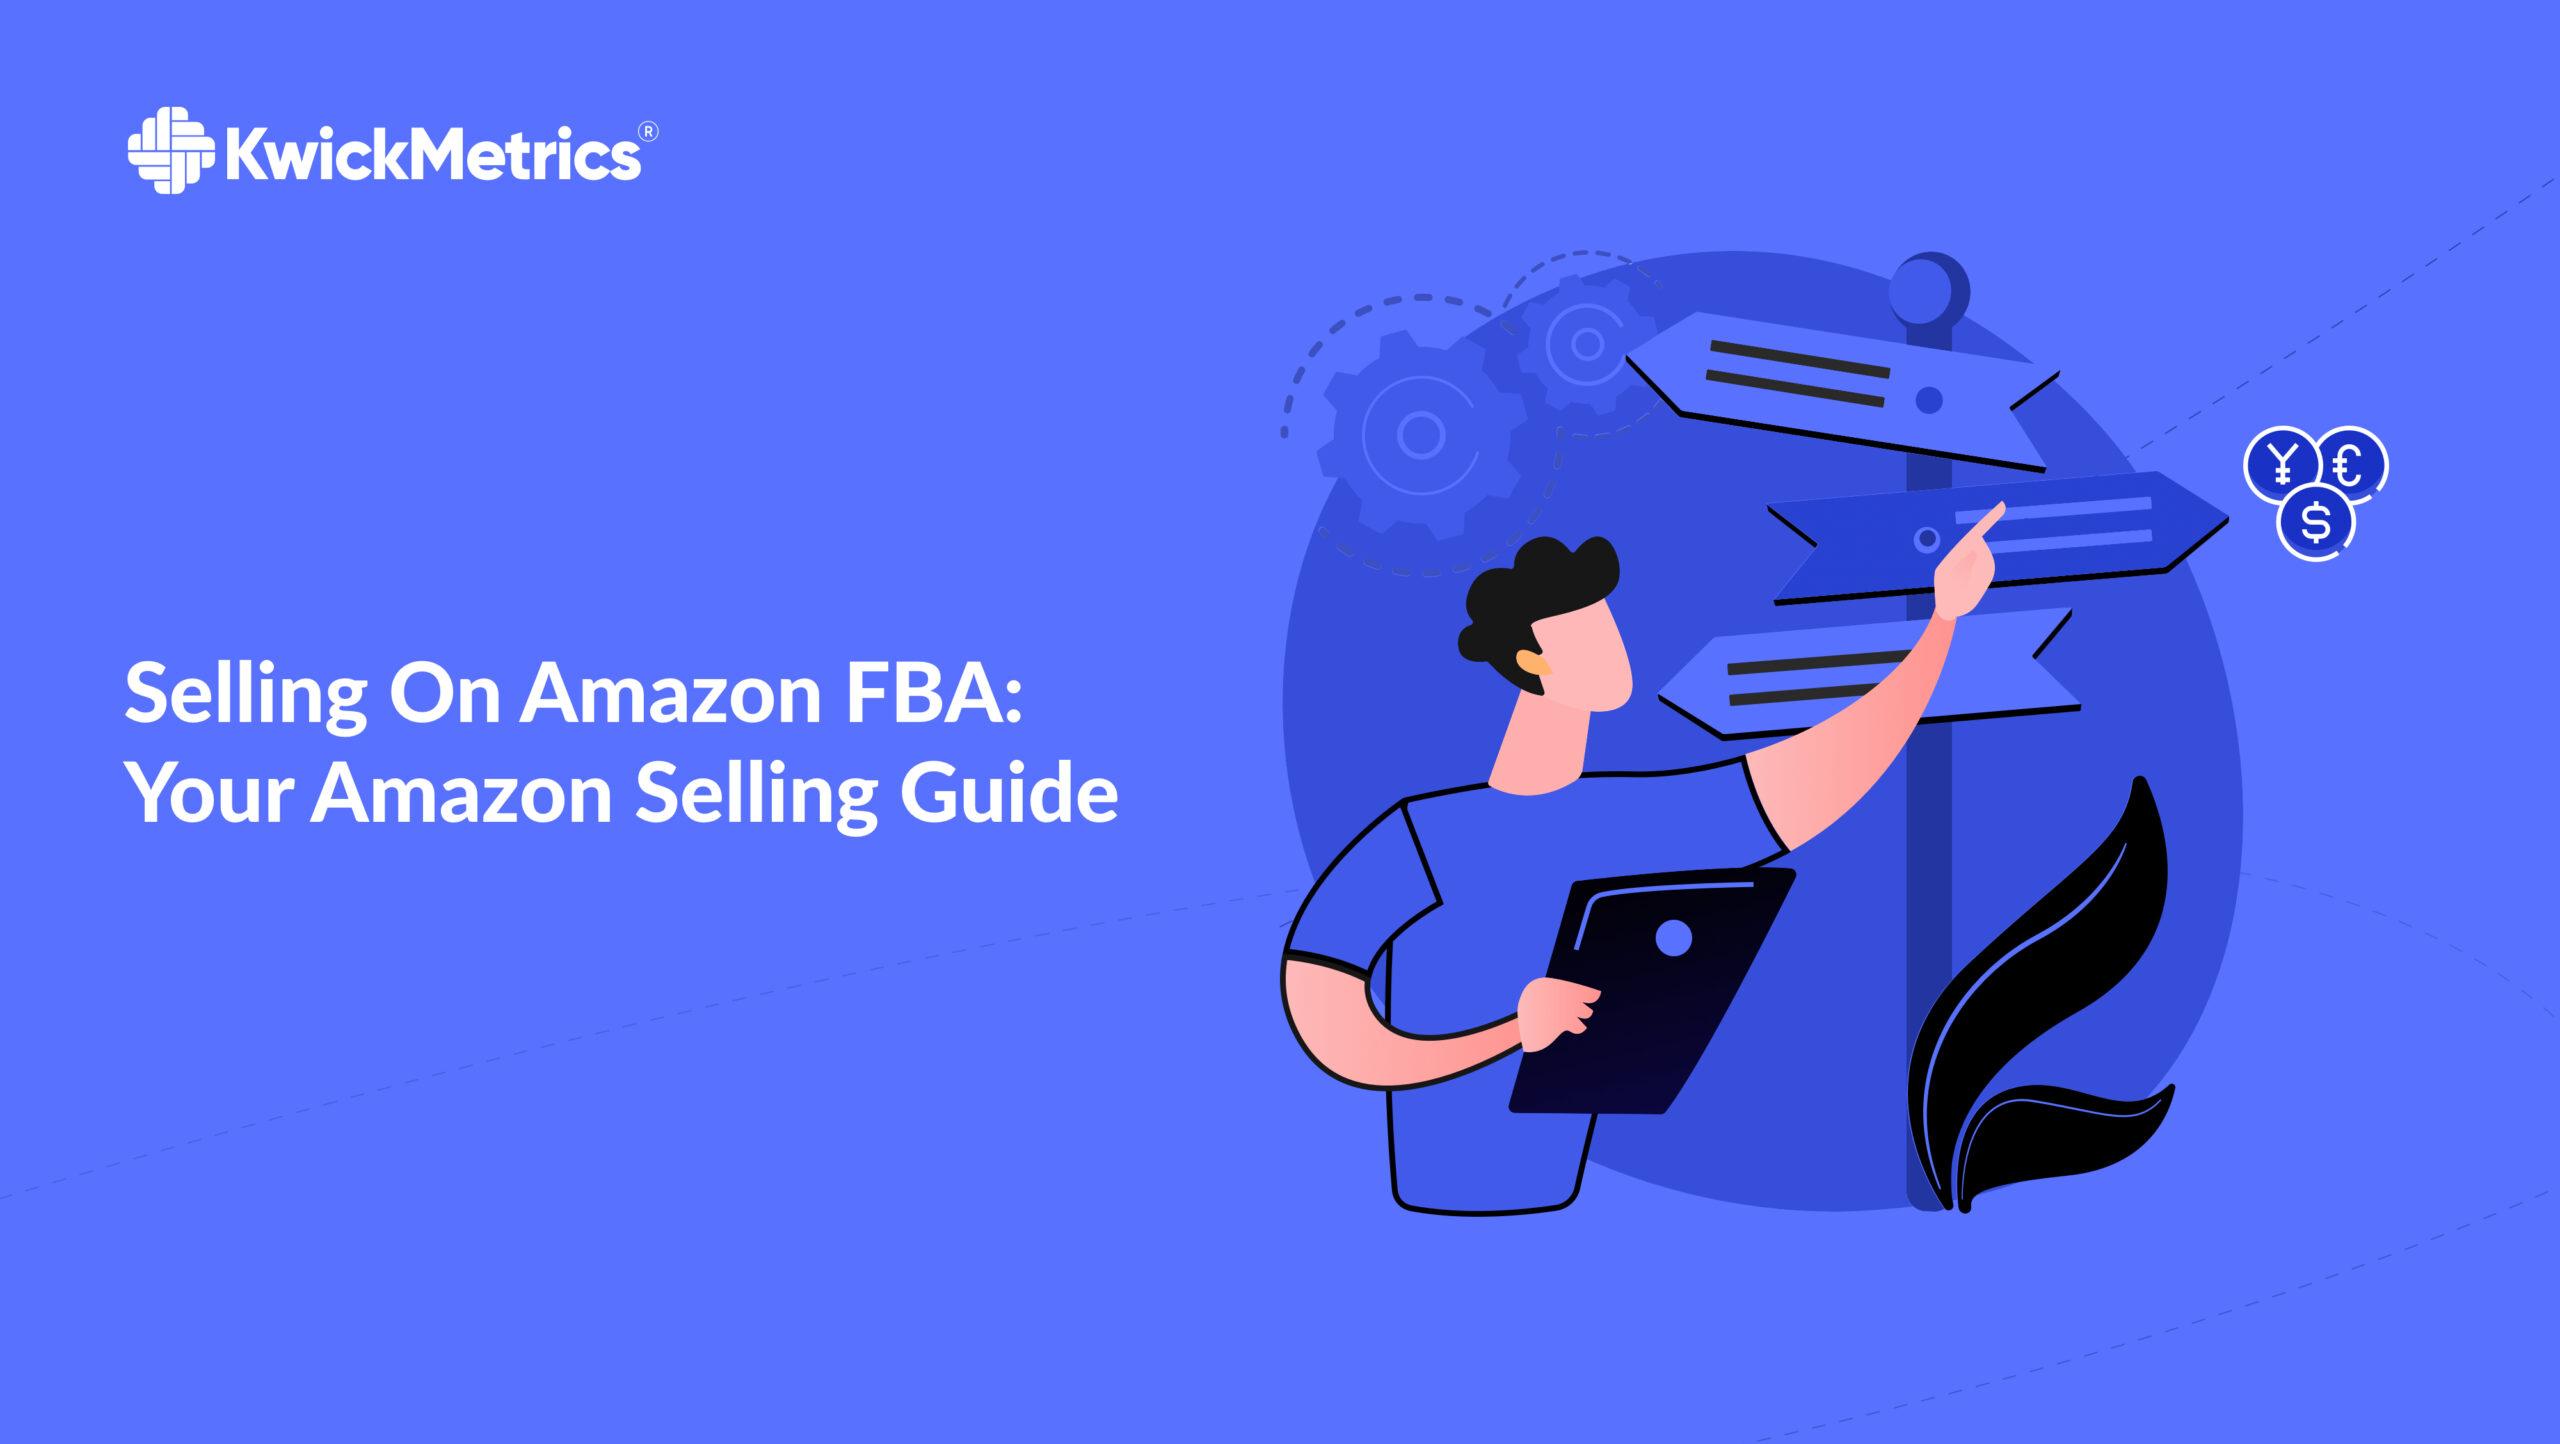 How to Sell on Amazon FBA?